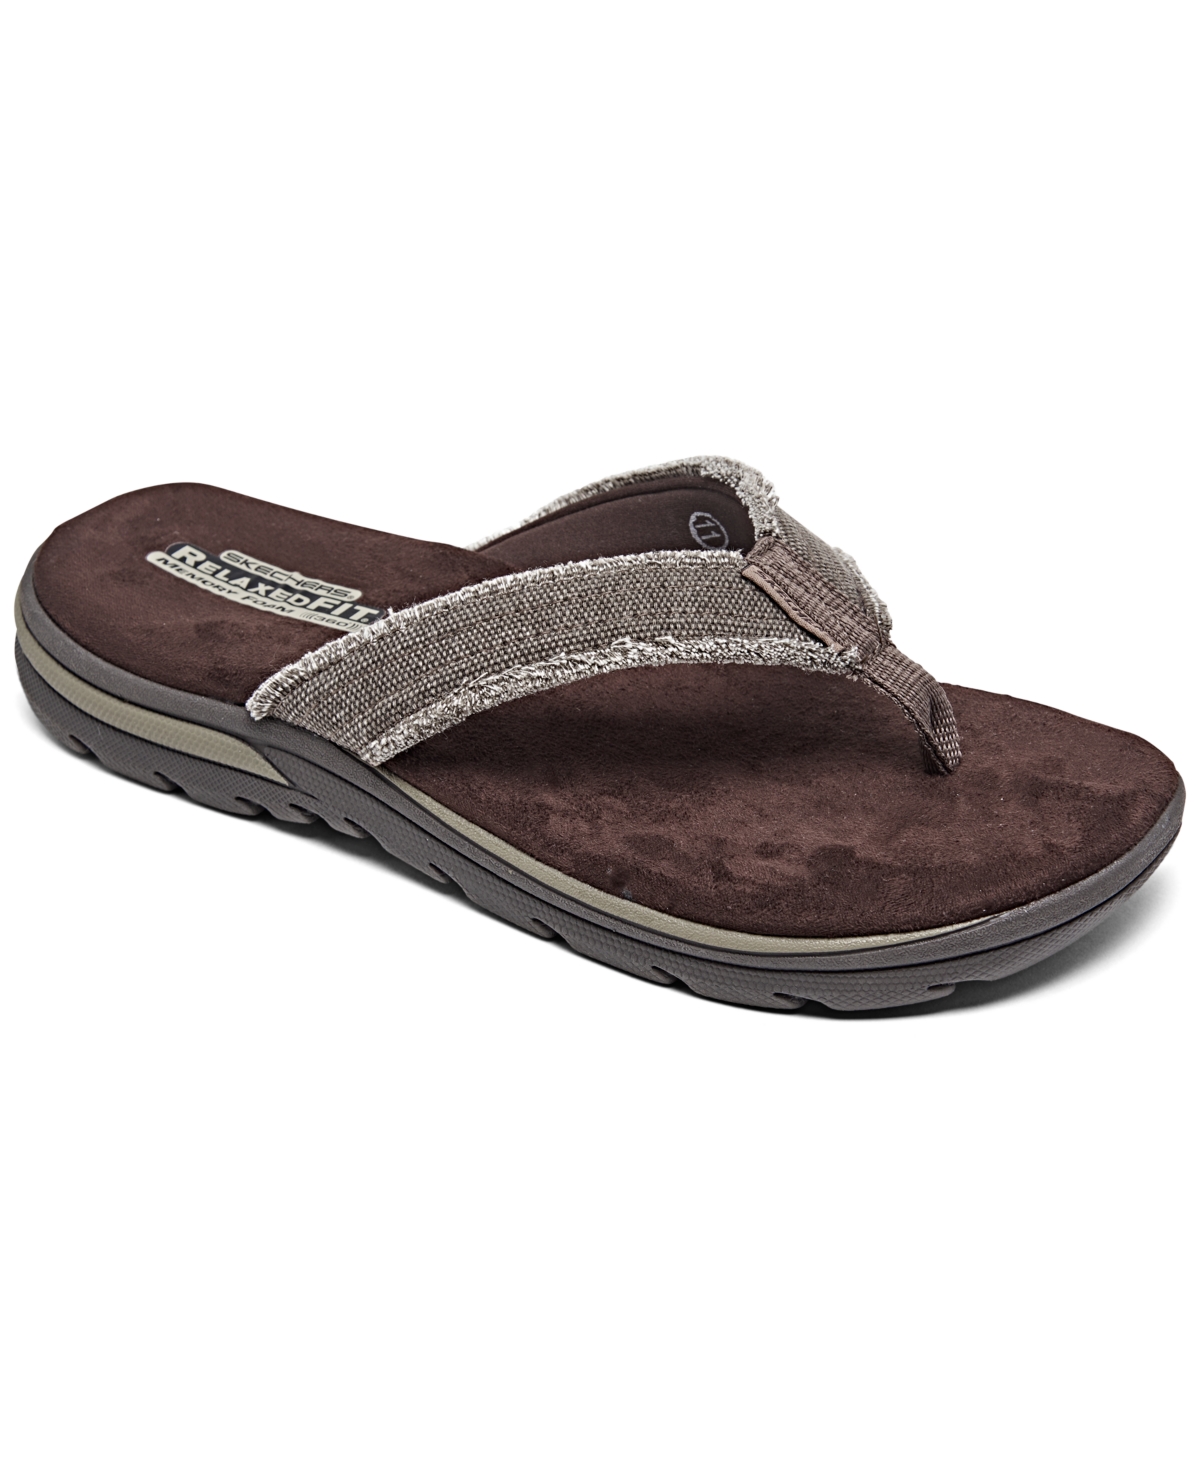 Skechers Relaxed Fit Supreme Bosnia Thong Sandals from Finish Line - Macy's